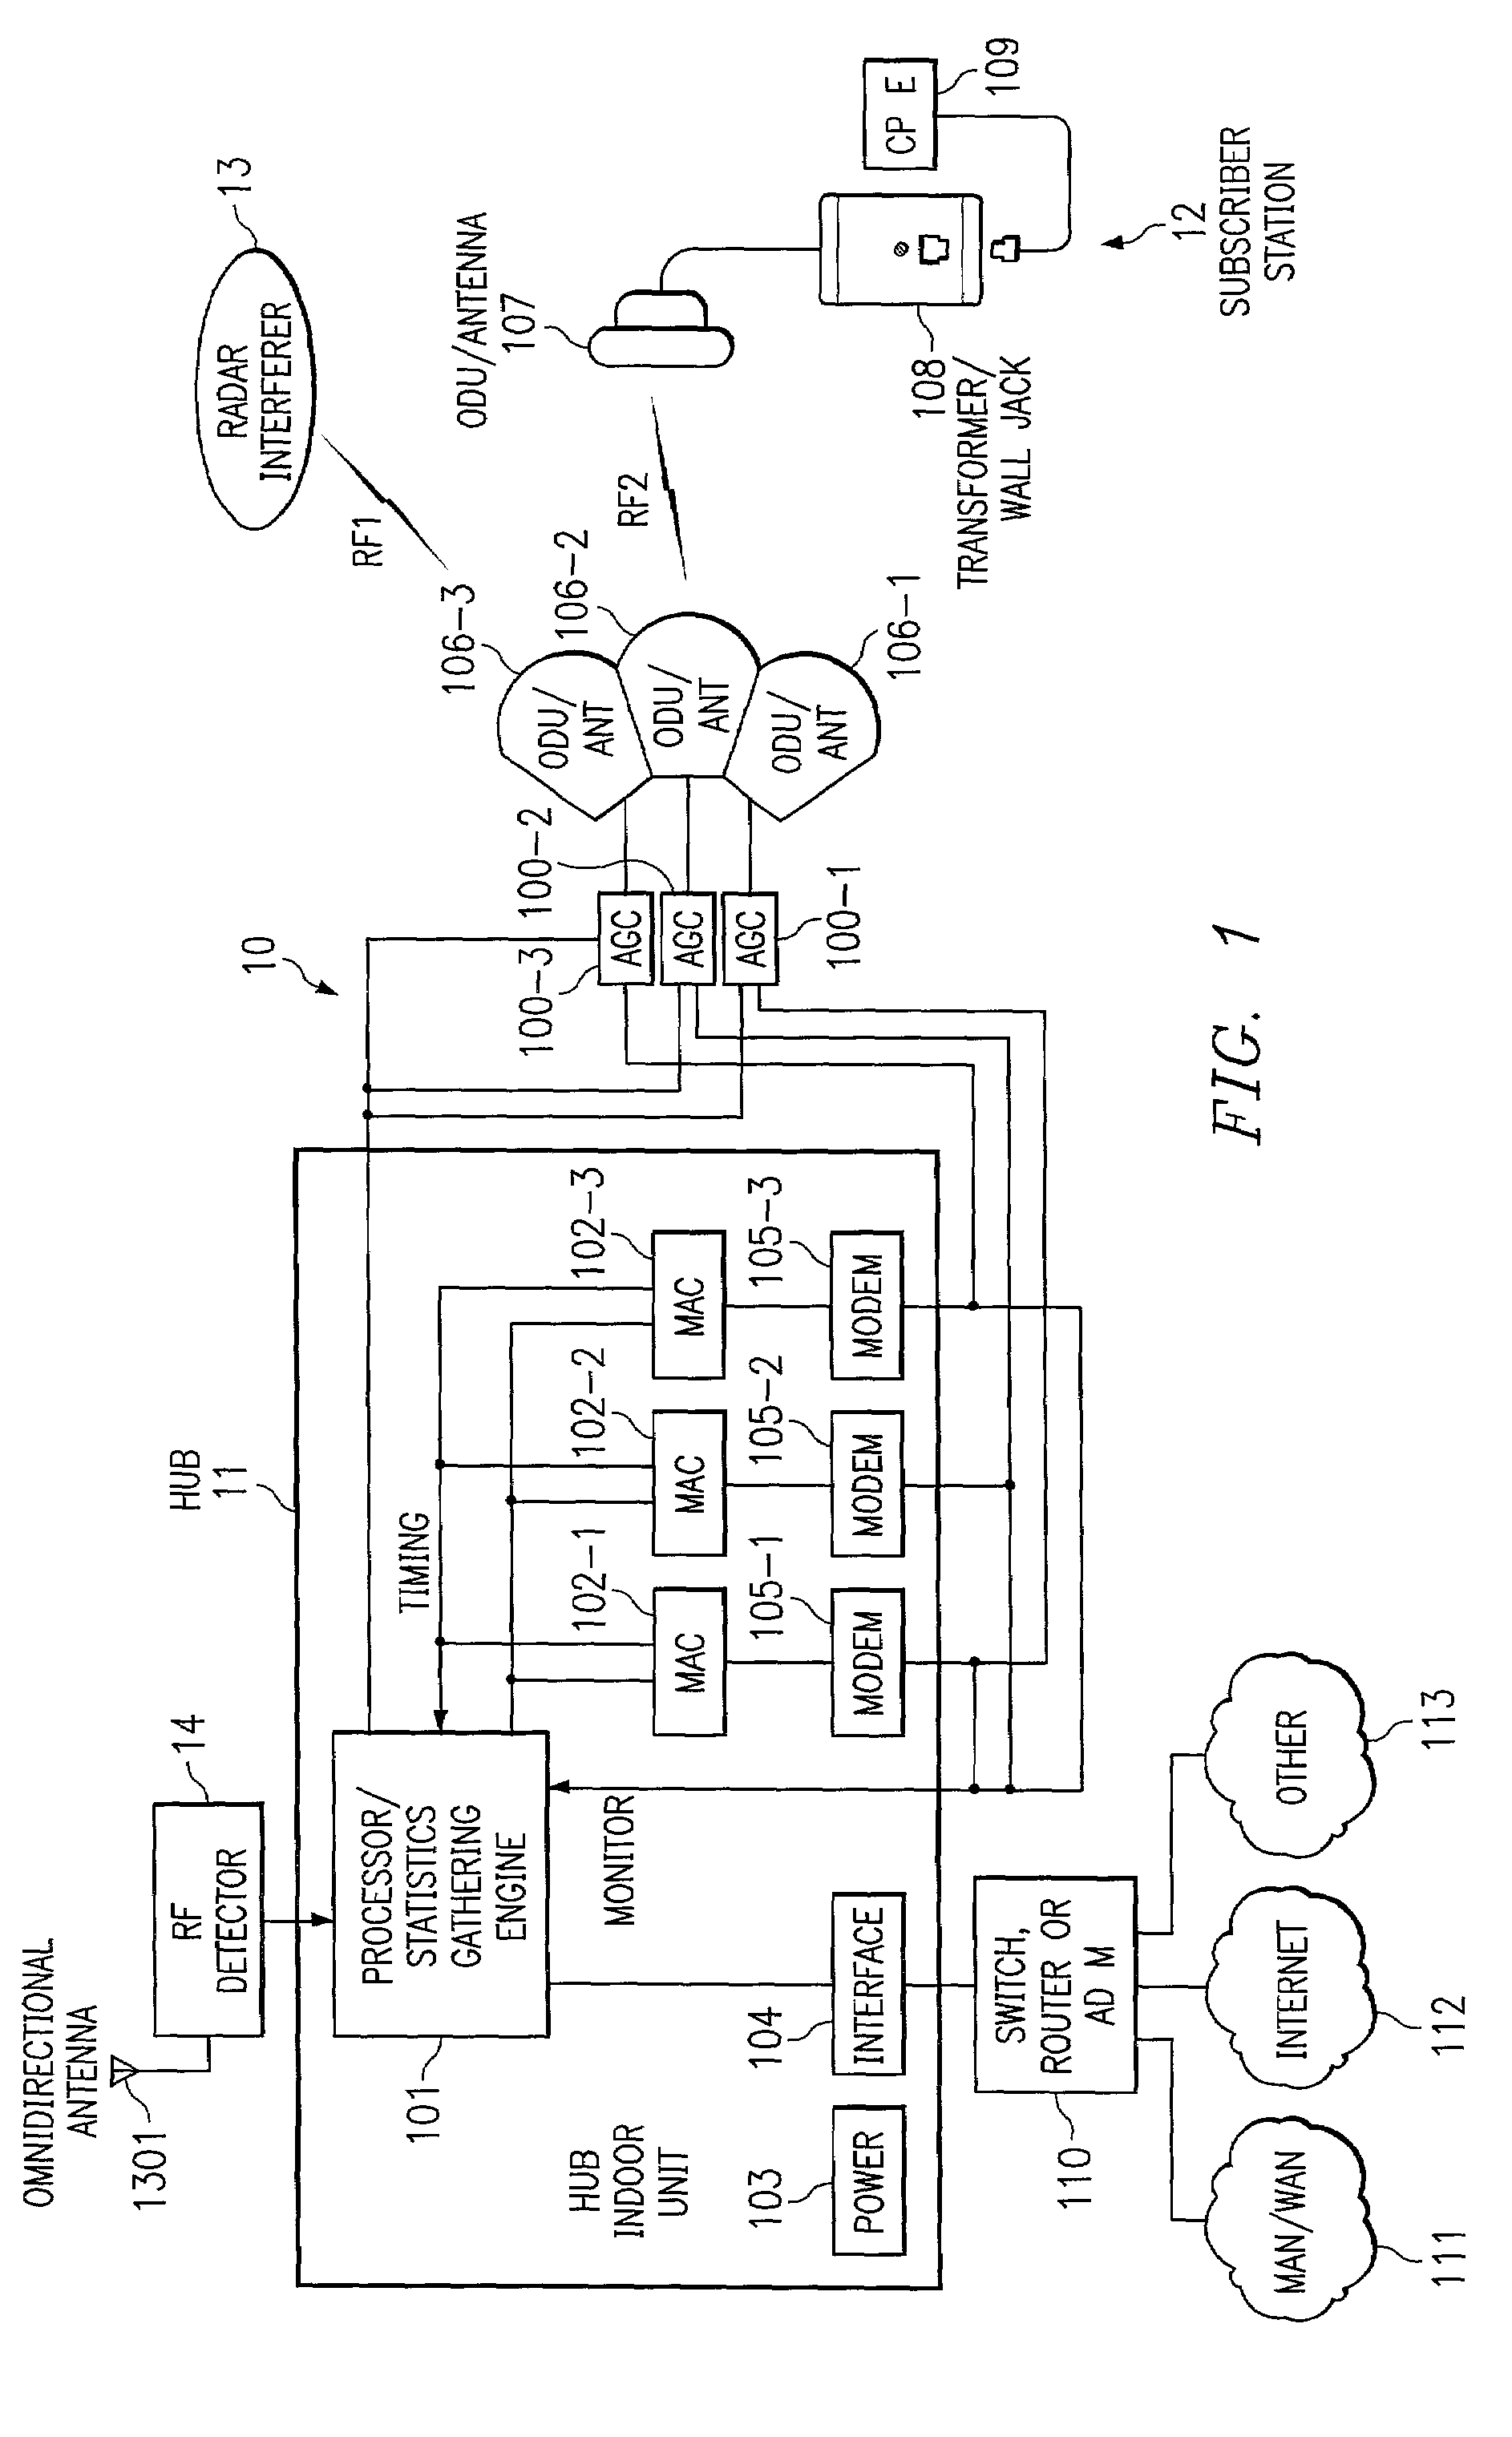 System and method for statistically directing automatic gain control